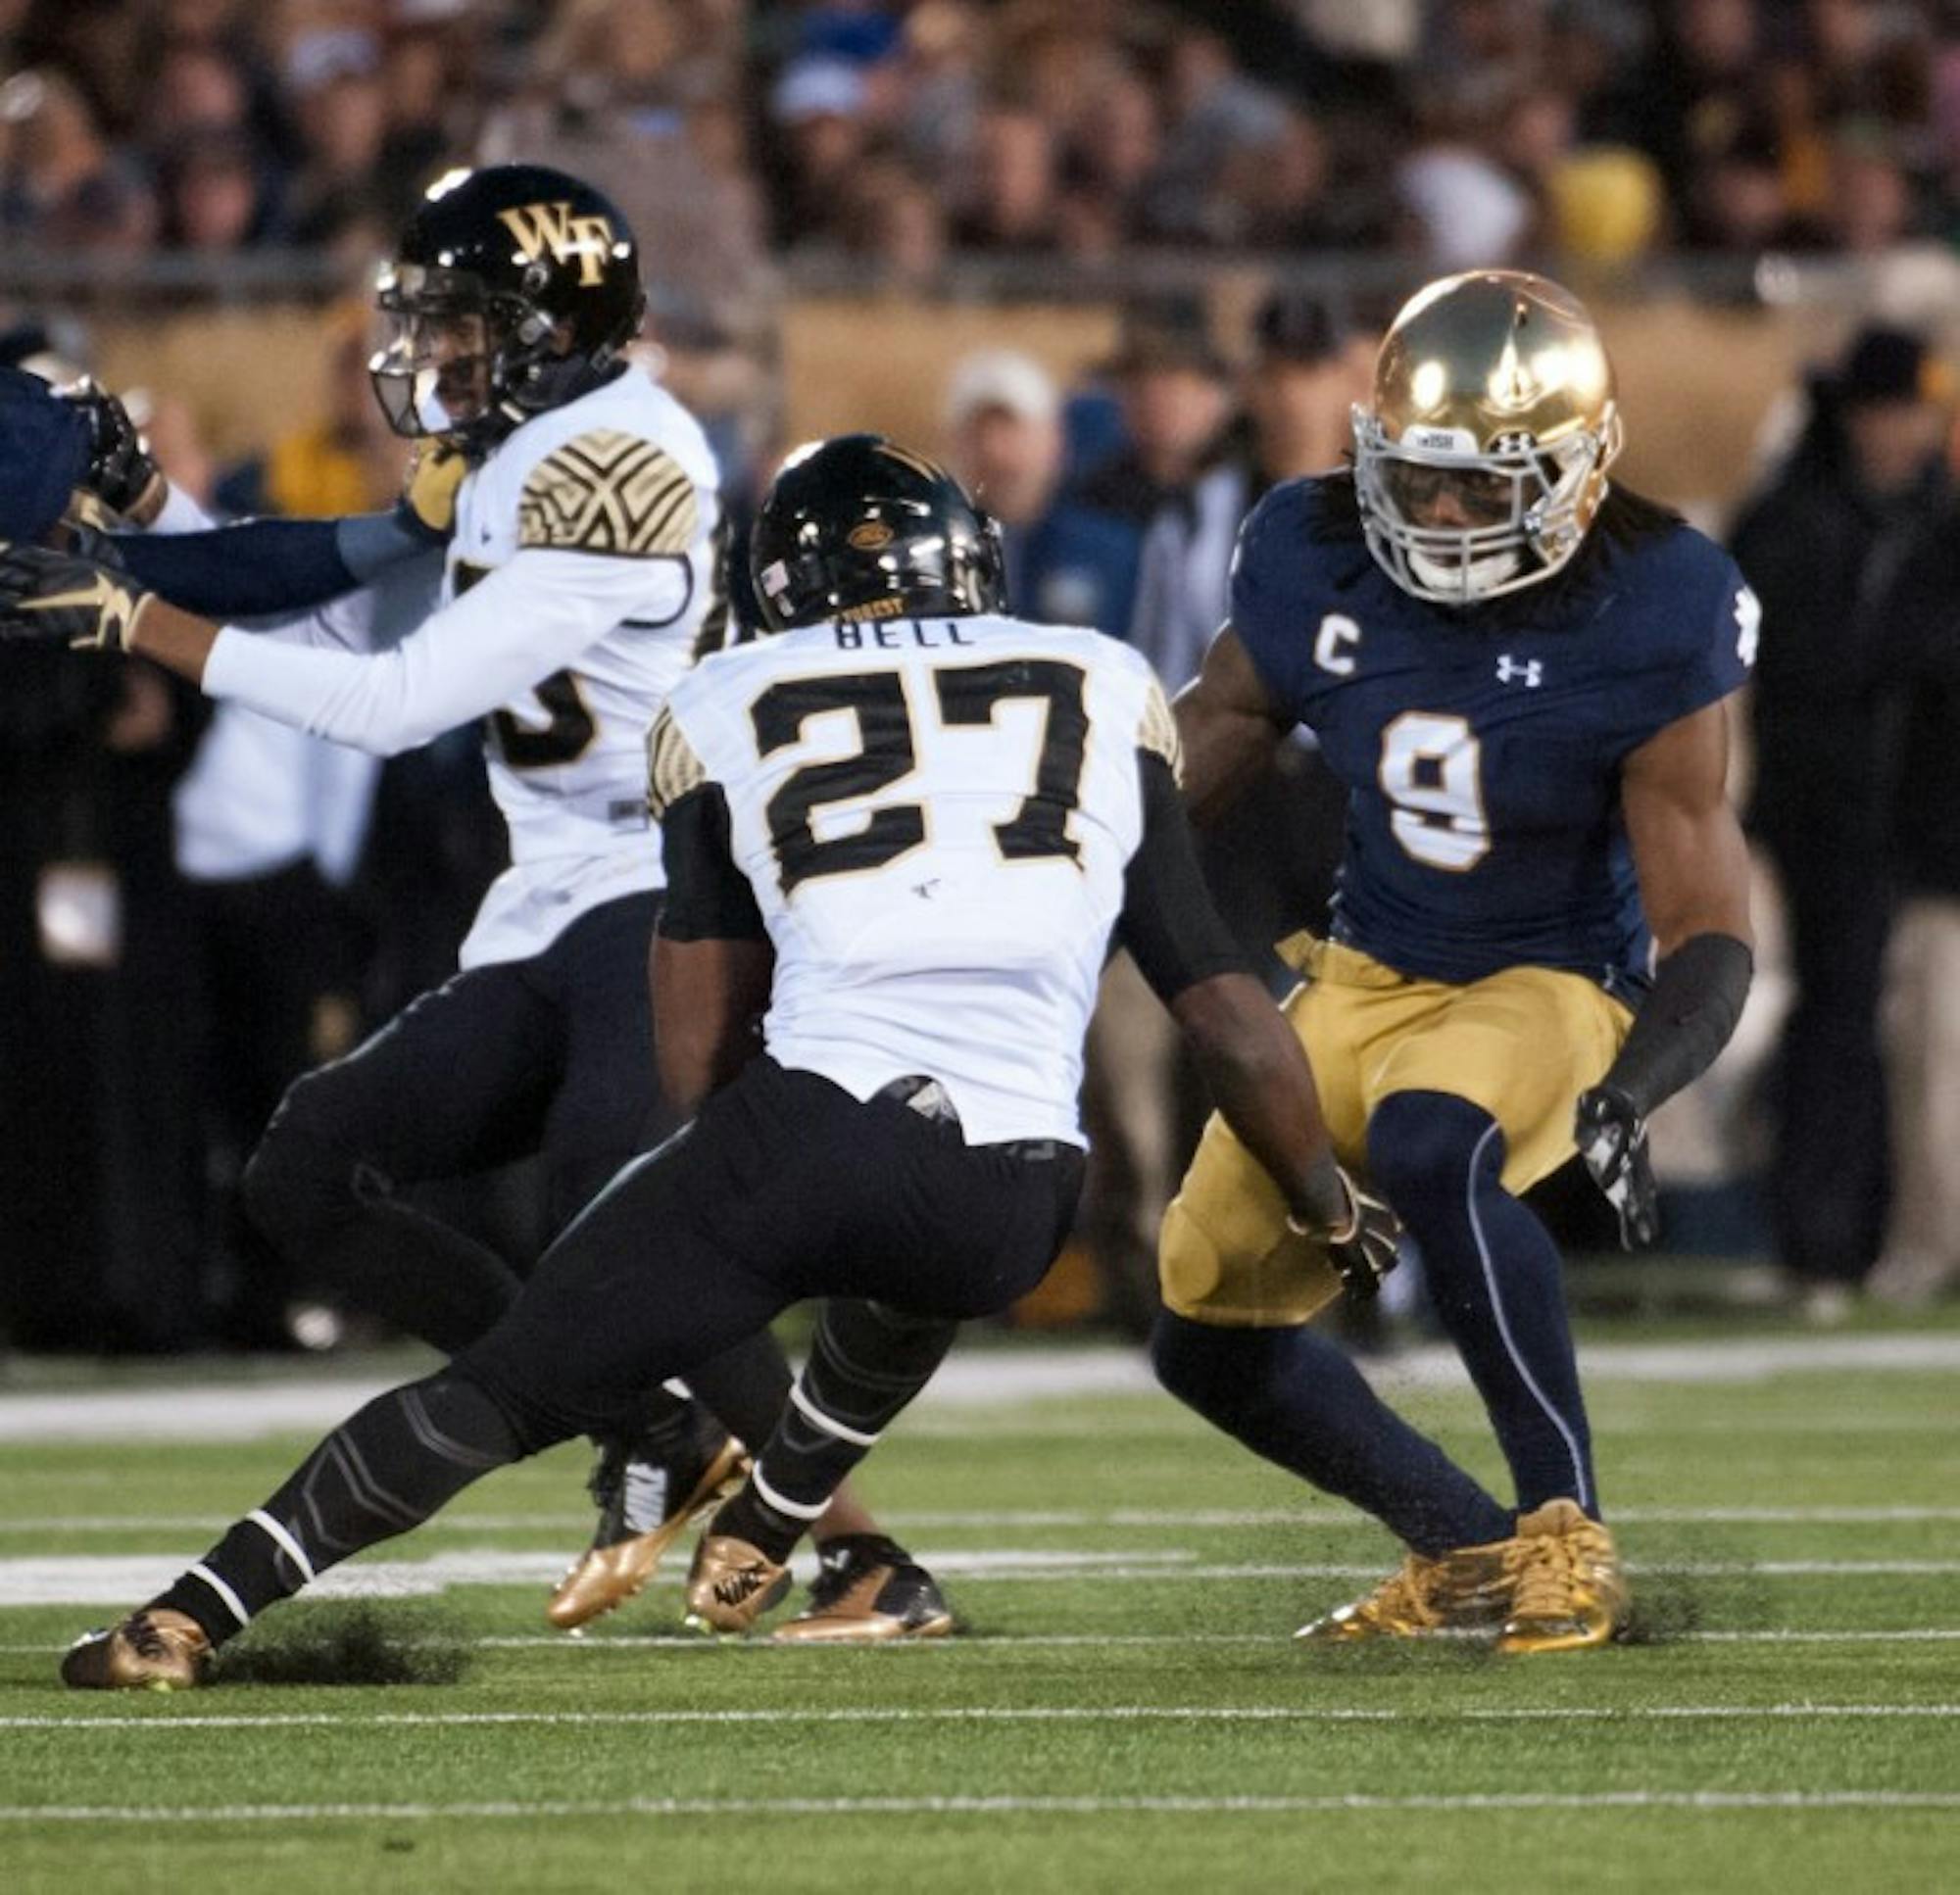 Irish junior linebacker Jaylon Smith lines up a tackle during Notre Dame’s 28-7 win over Wake Forest on Nov. 14.